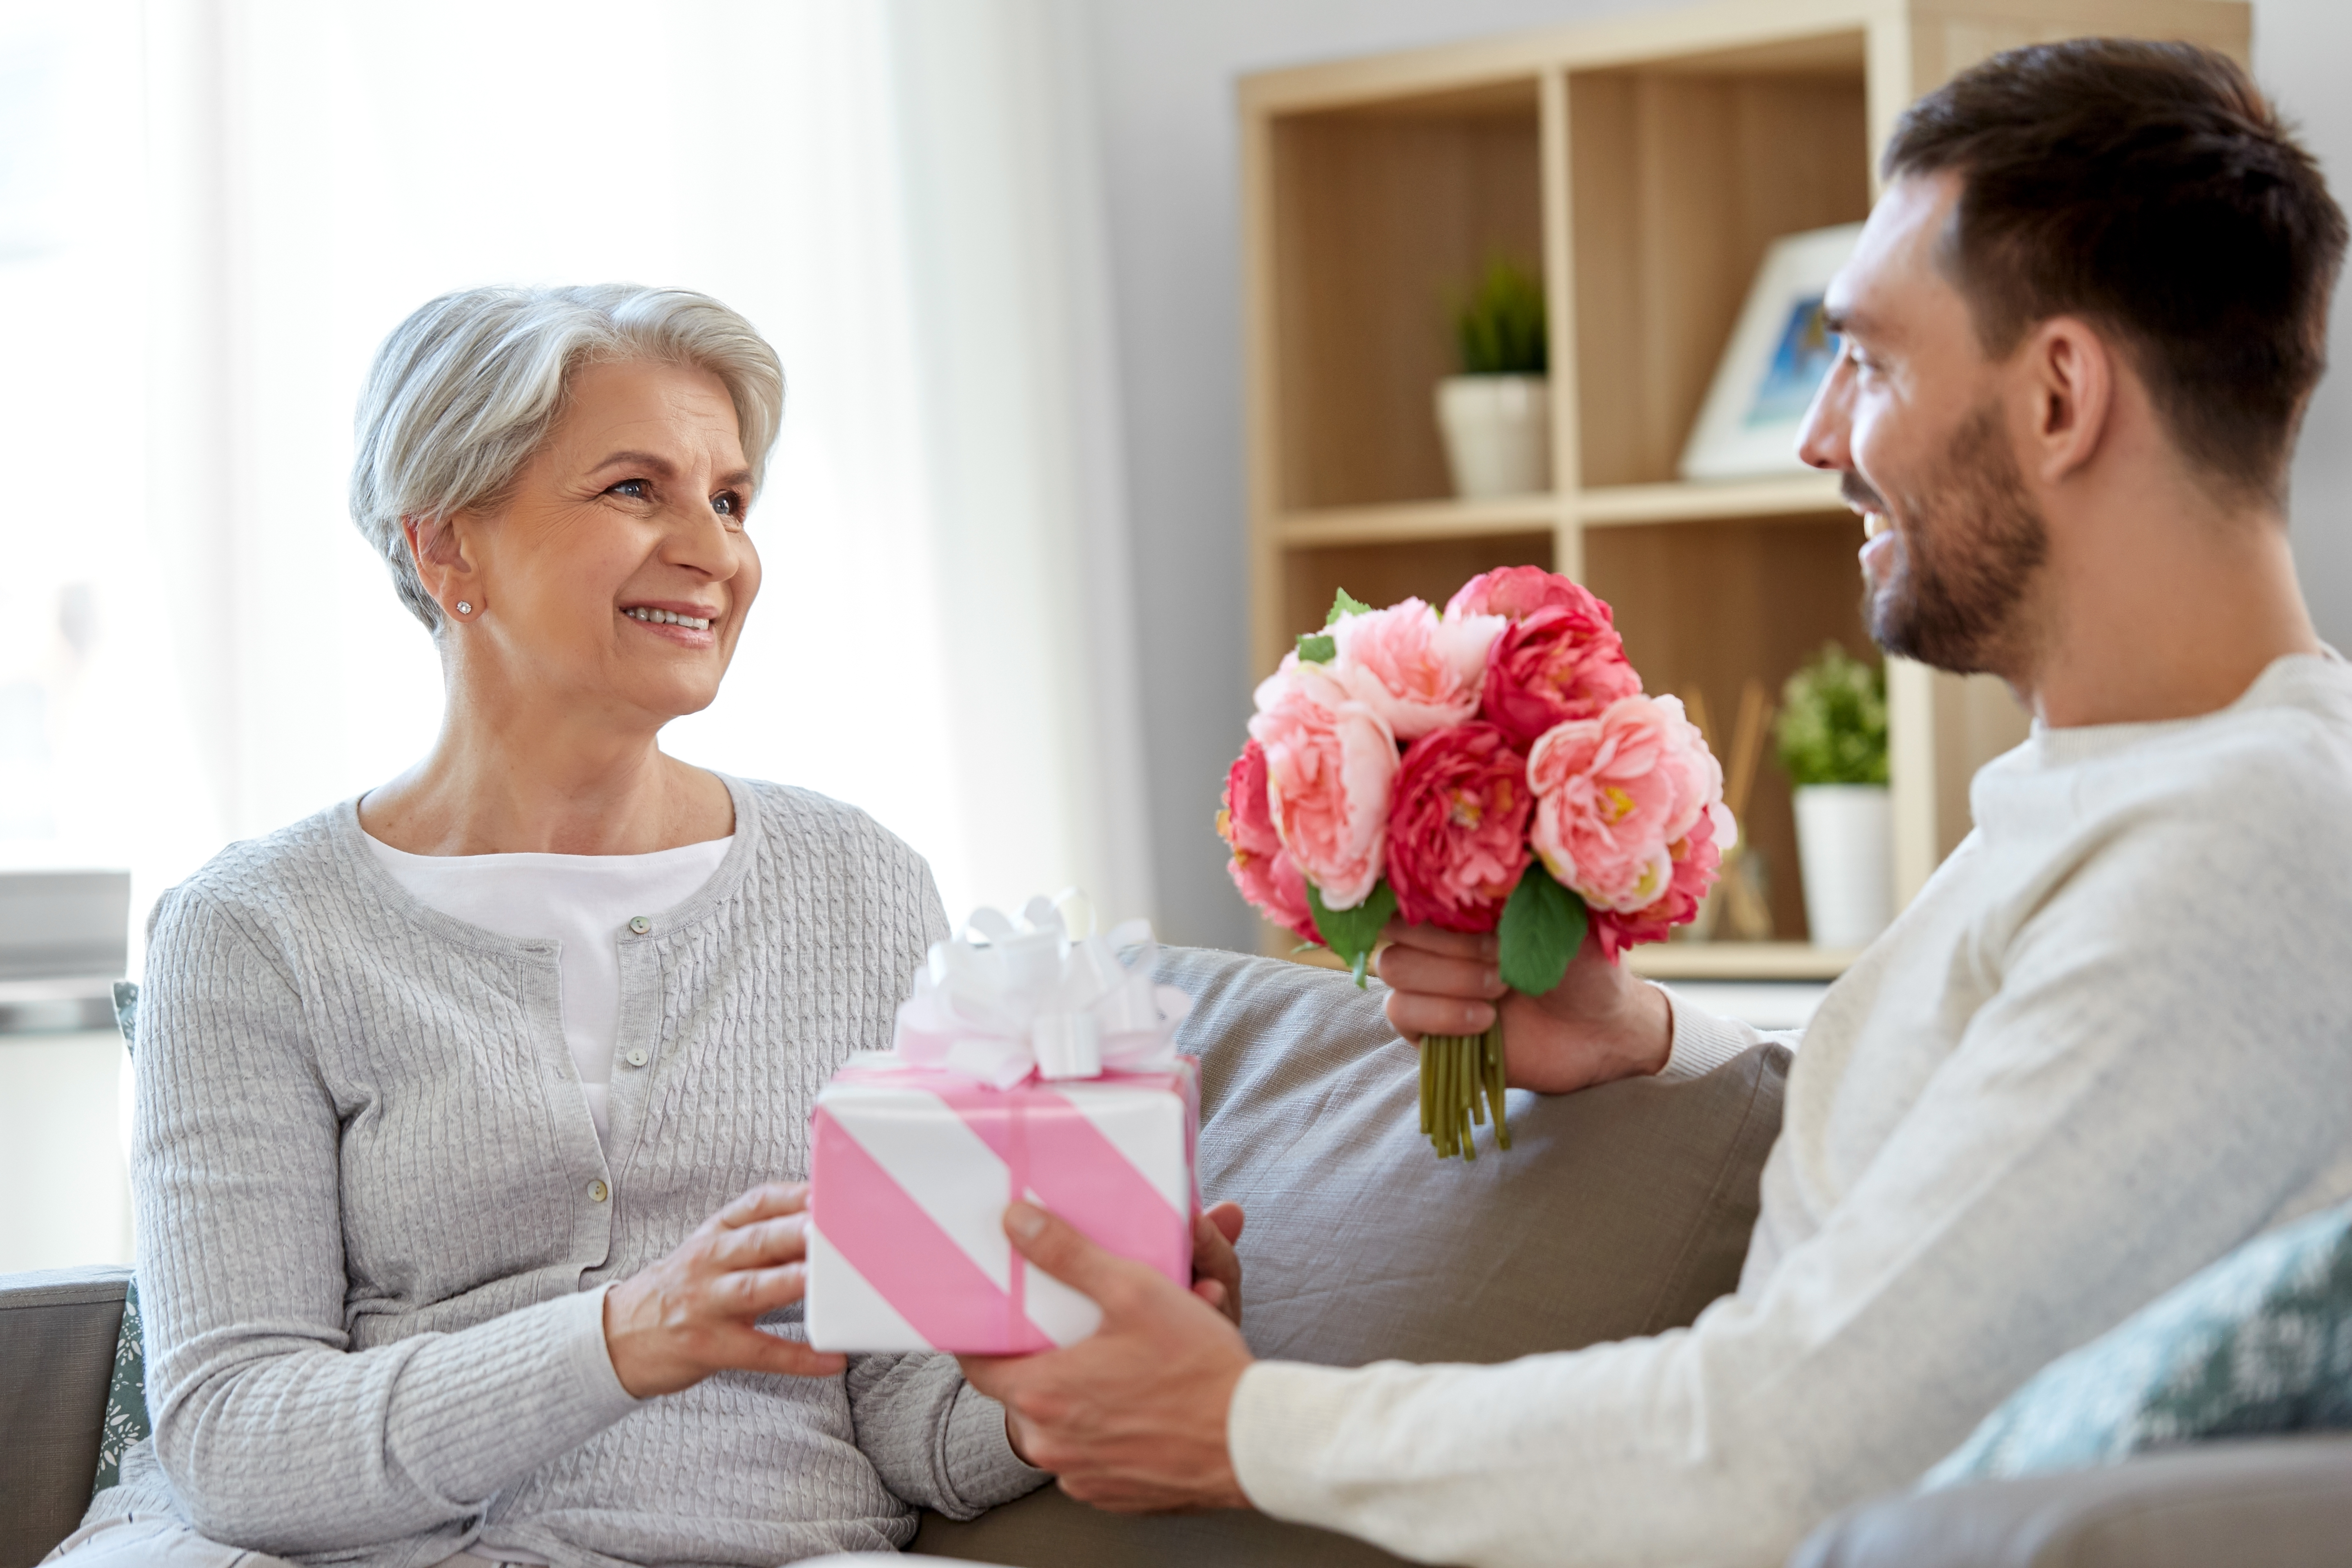 A smiling adult son giving a gift and flowers to his senior mother | Source: Shutterstock